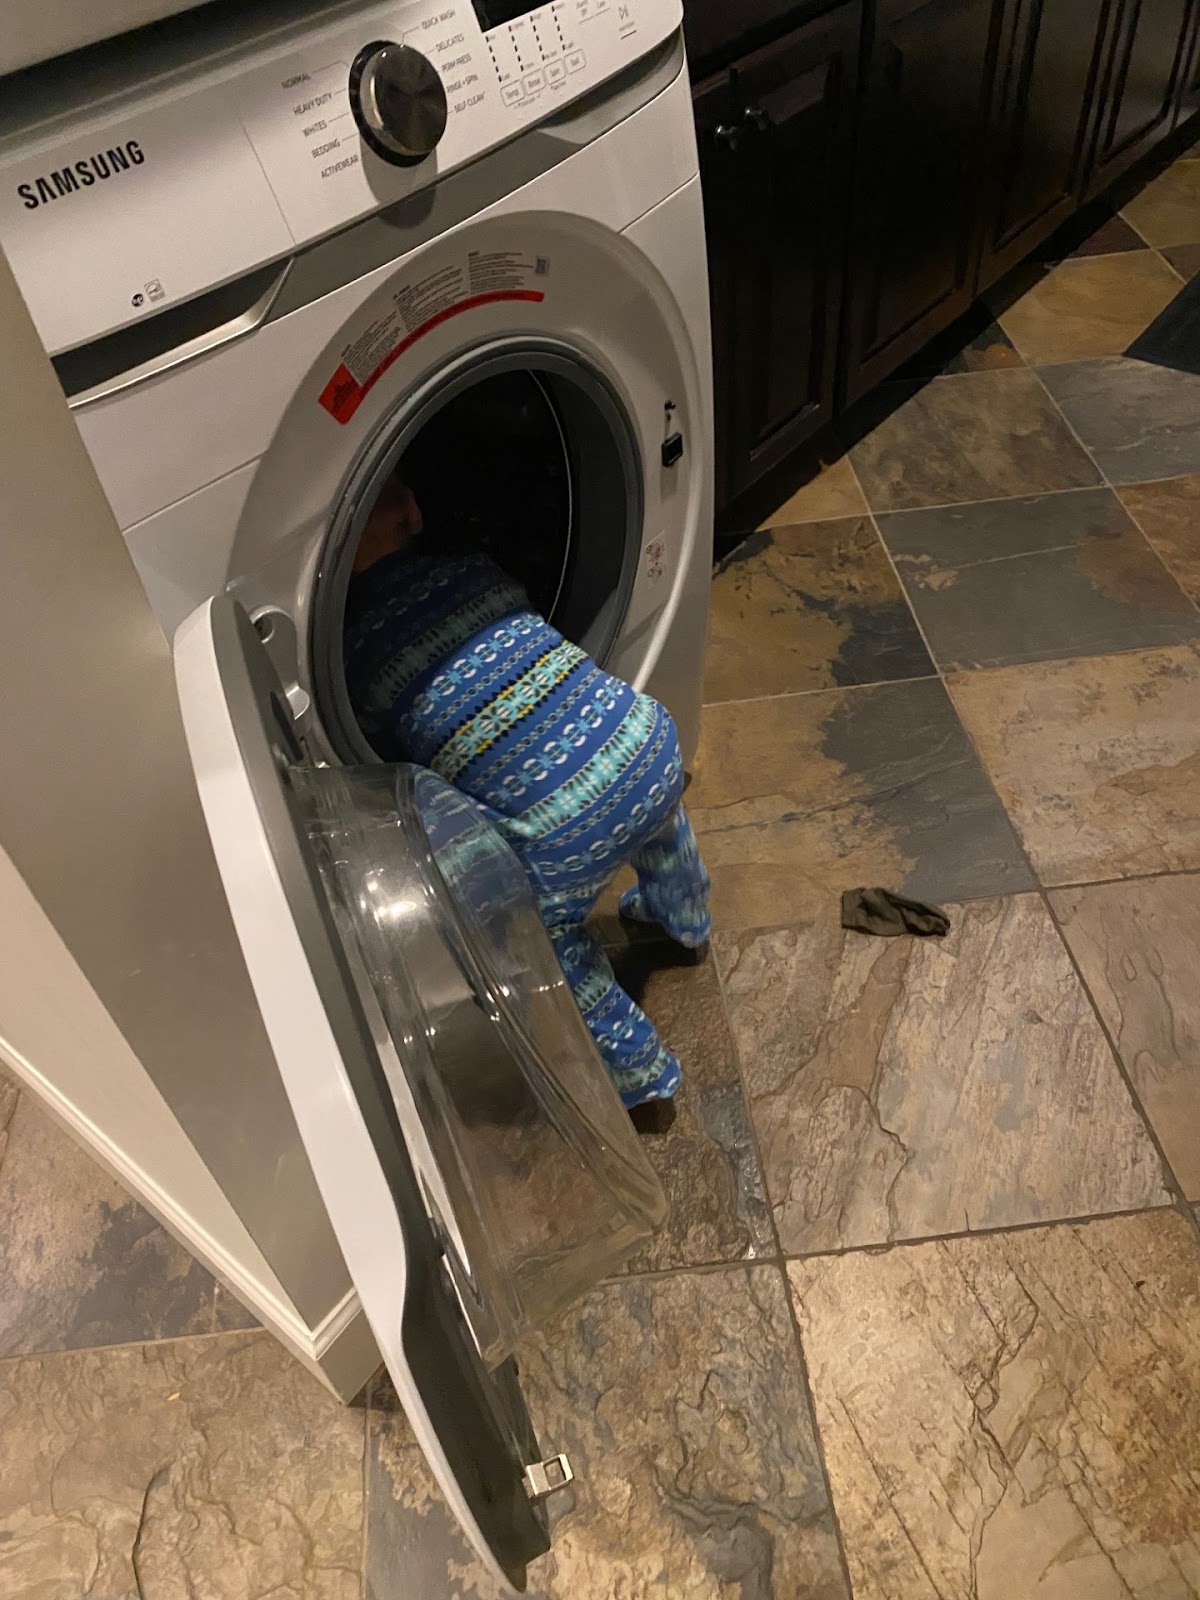 A child climbing into a dryer, illustrating that DIY dryer vent cleaning can cause damage.